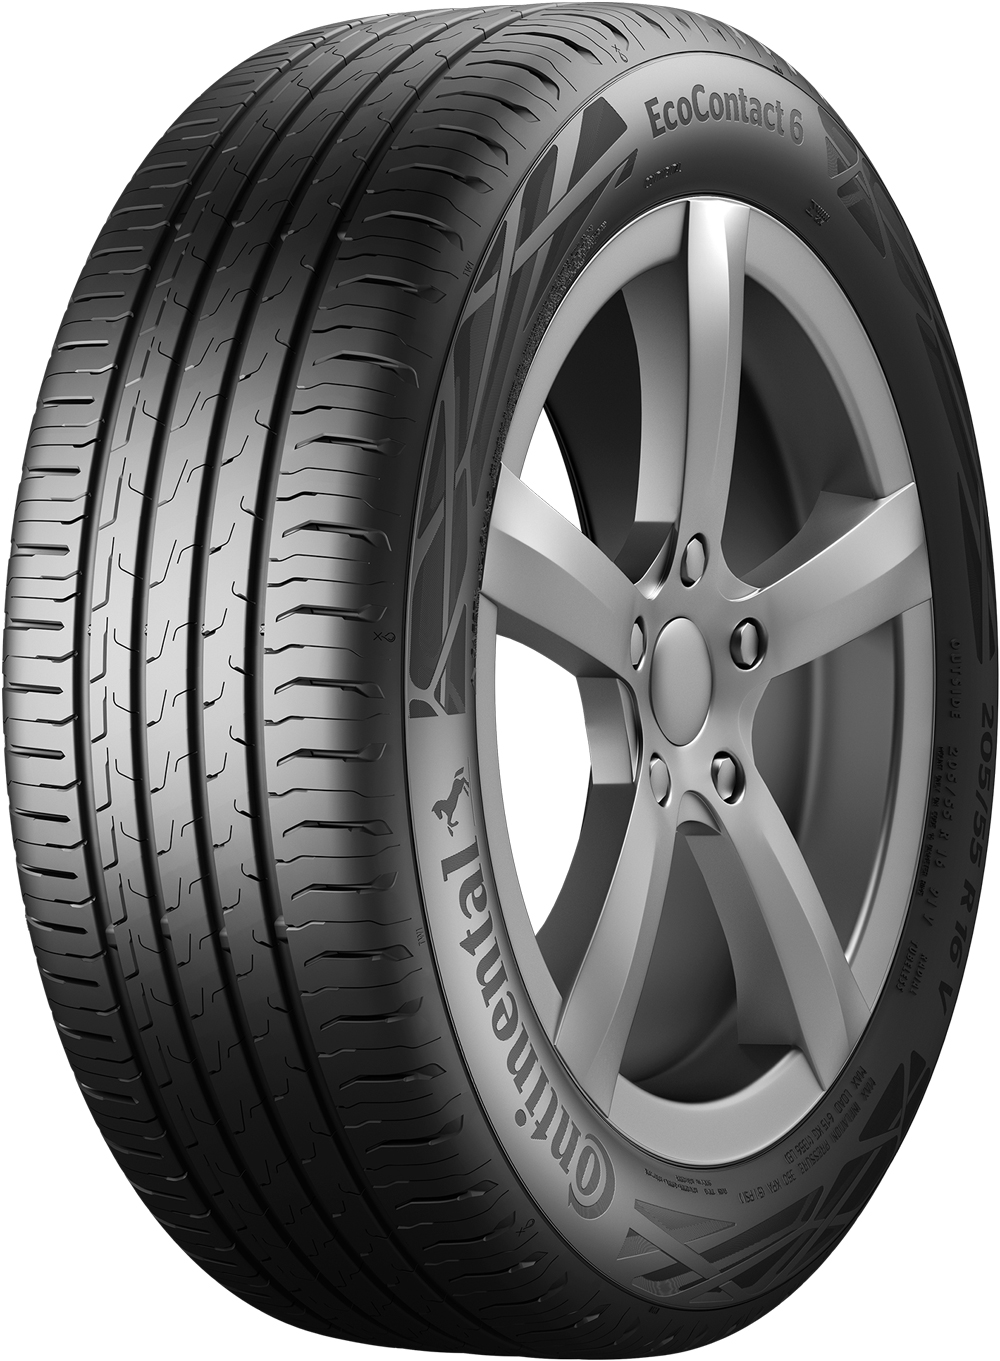 Anvelope auto CONTINENTAL ECO6AO AUDI 215/65 R17 99H